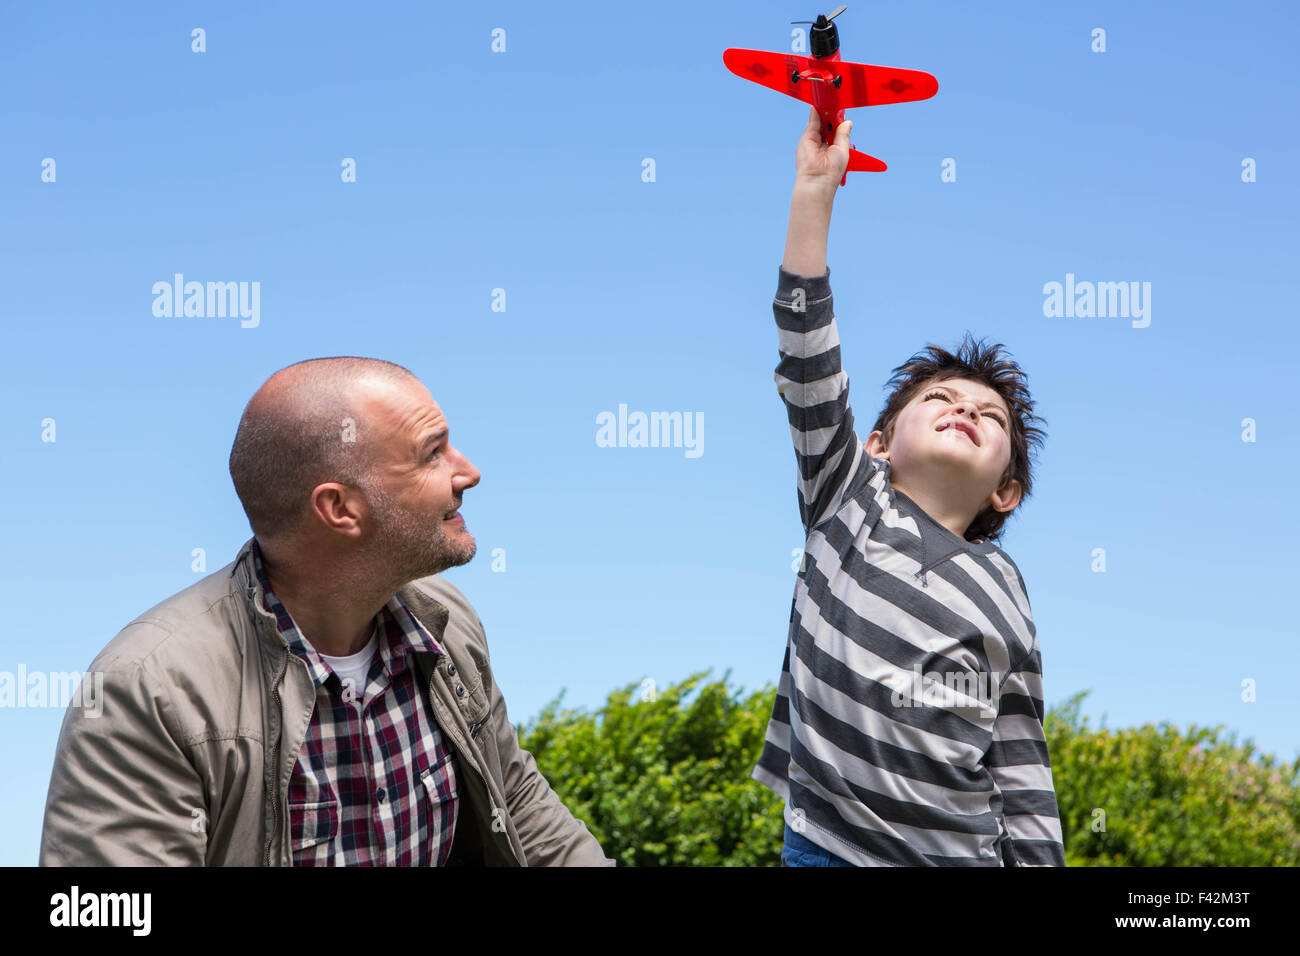 Young boy playing with a toy plane Stock Photo